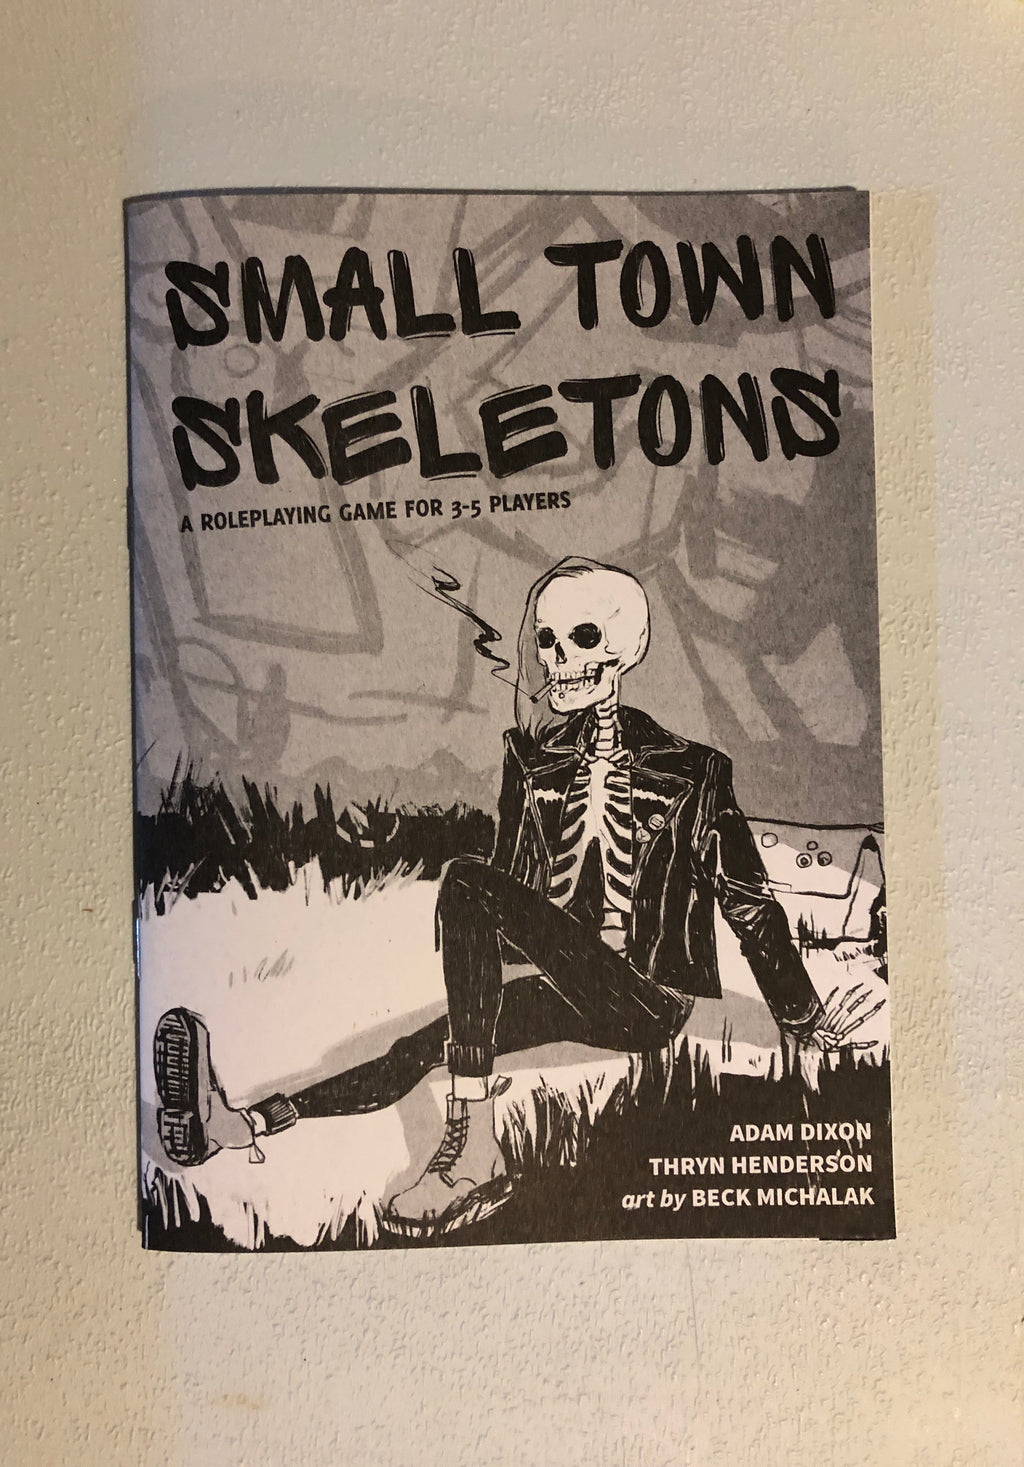 Small Town: Skeletons